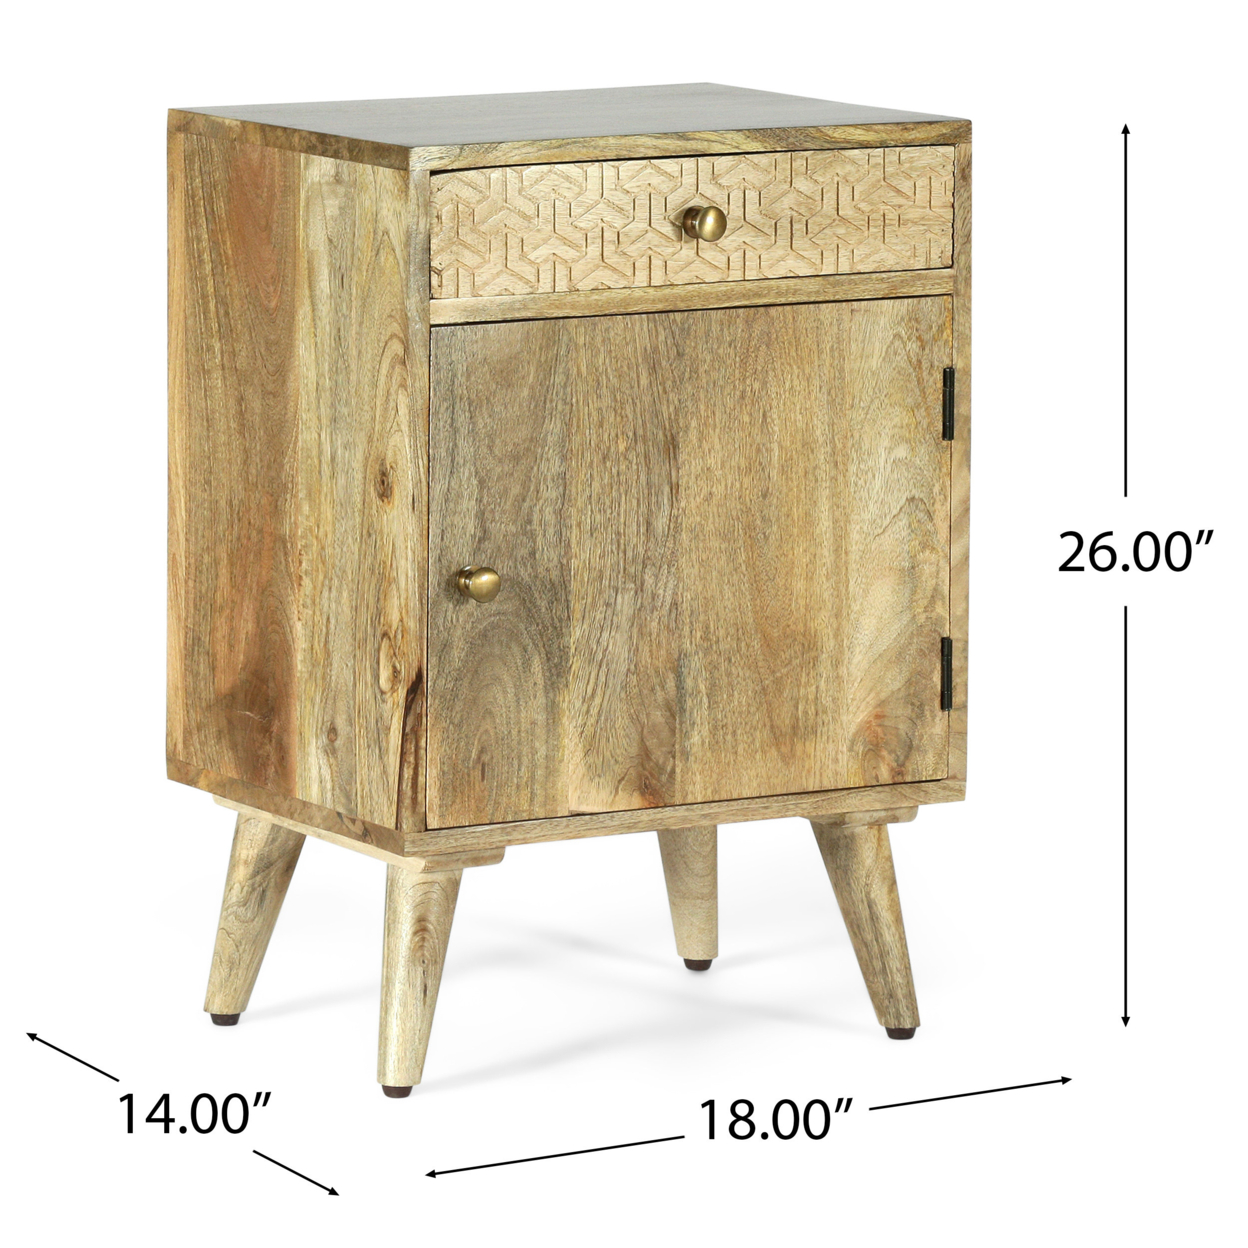 Stowe Boho Handcrafted Mango Wood Nightstand With Storage, Natural